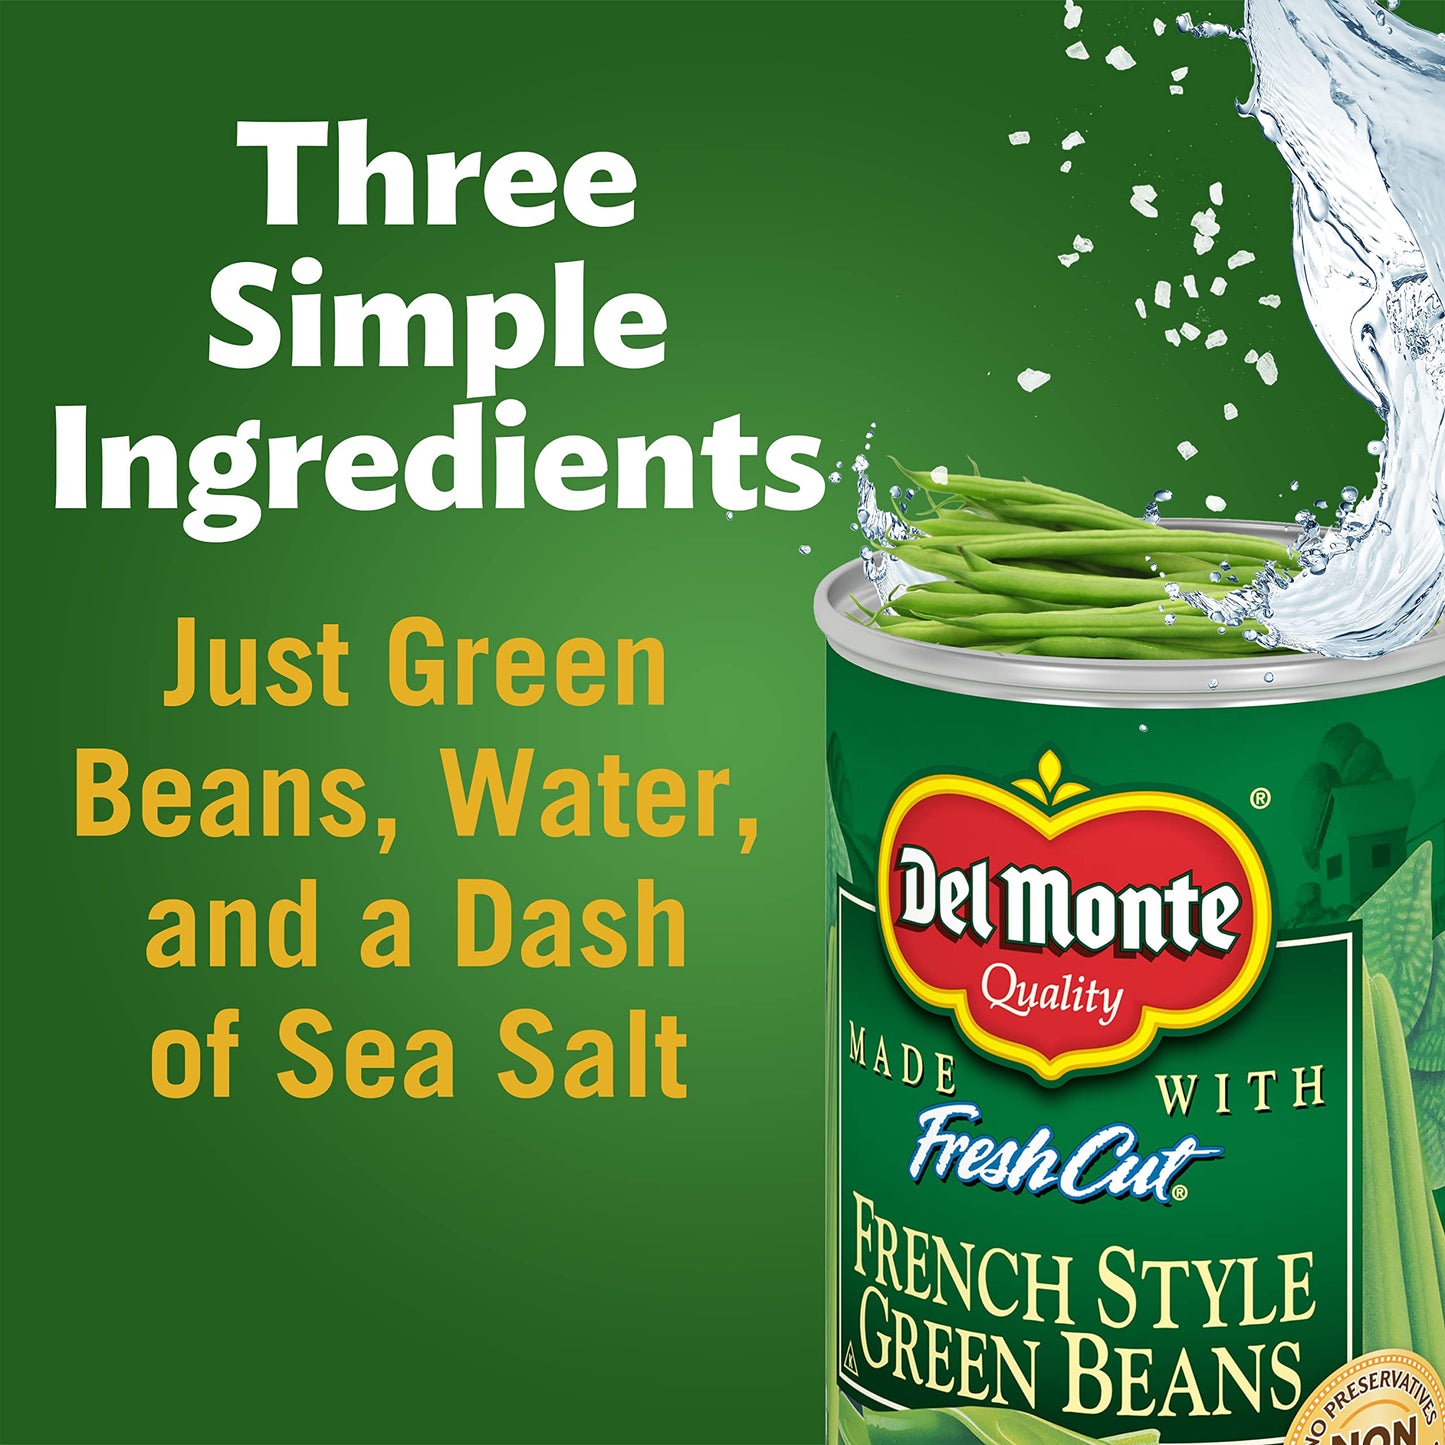 DEL MONTE BLUE LAKE French Style Green Beans, Canned Vegetables, 14.5 oz Can